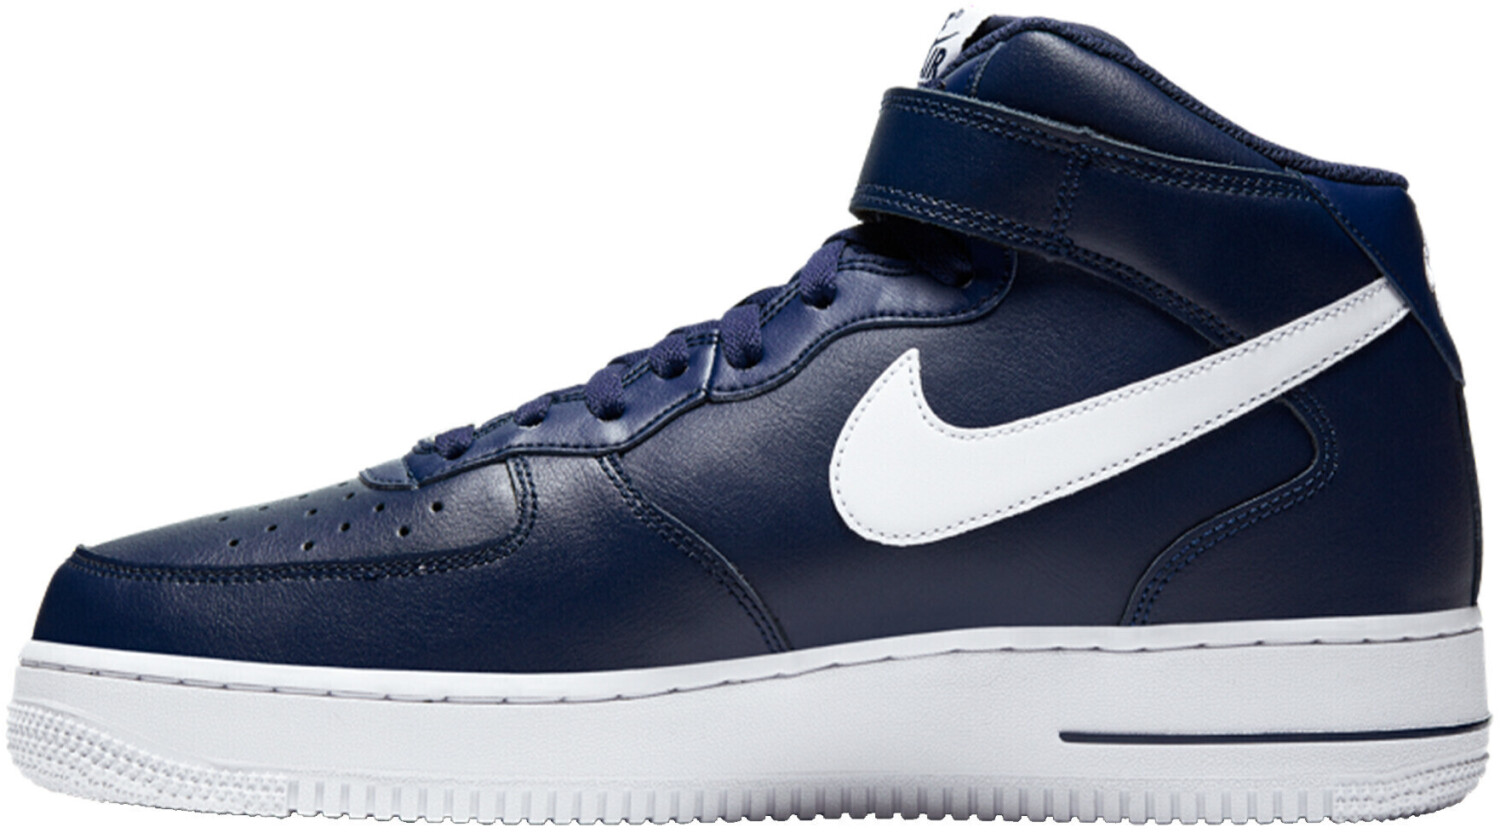 Buy Nike Air Force 1 Mid '07 midnight navy/white (CK4370-400) from £89. ...